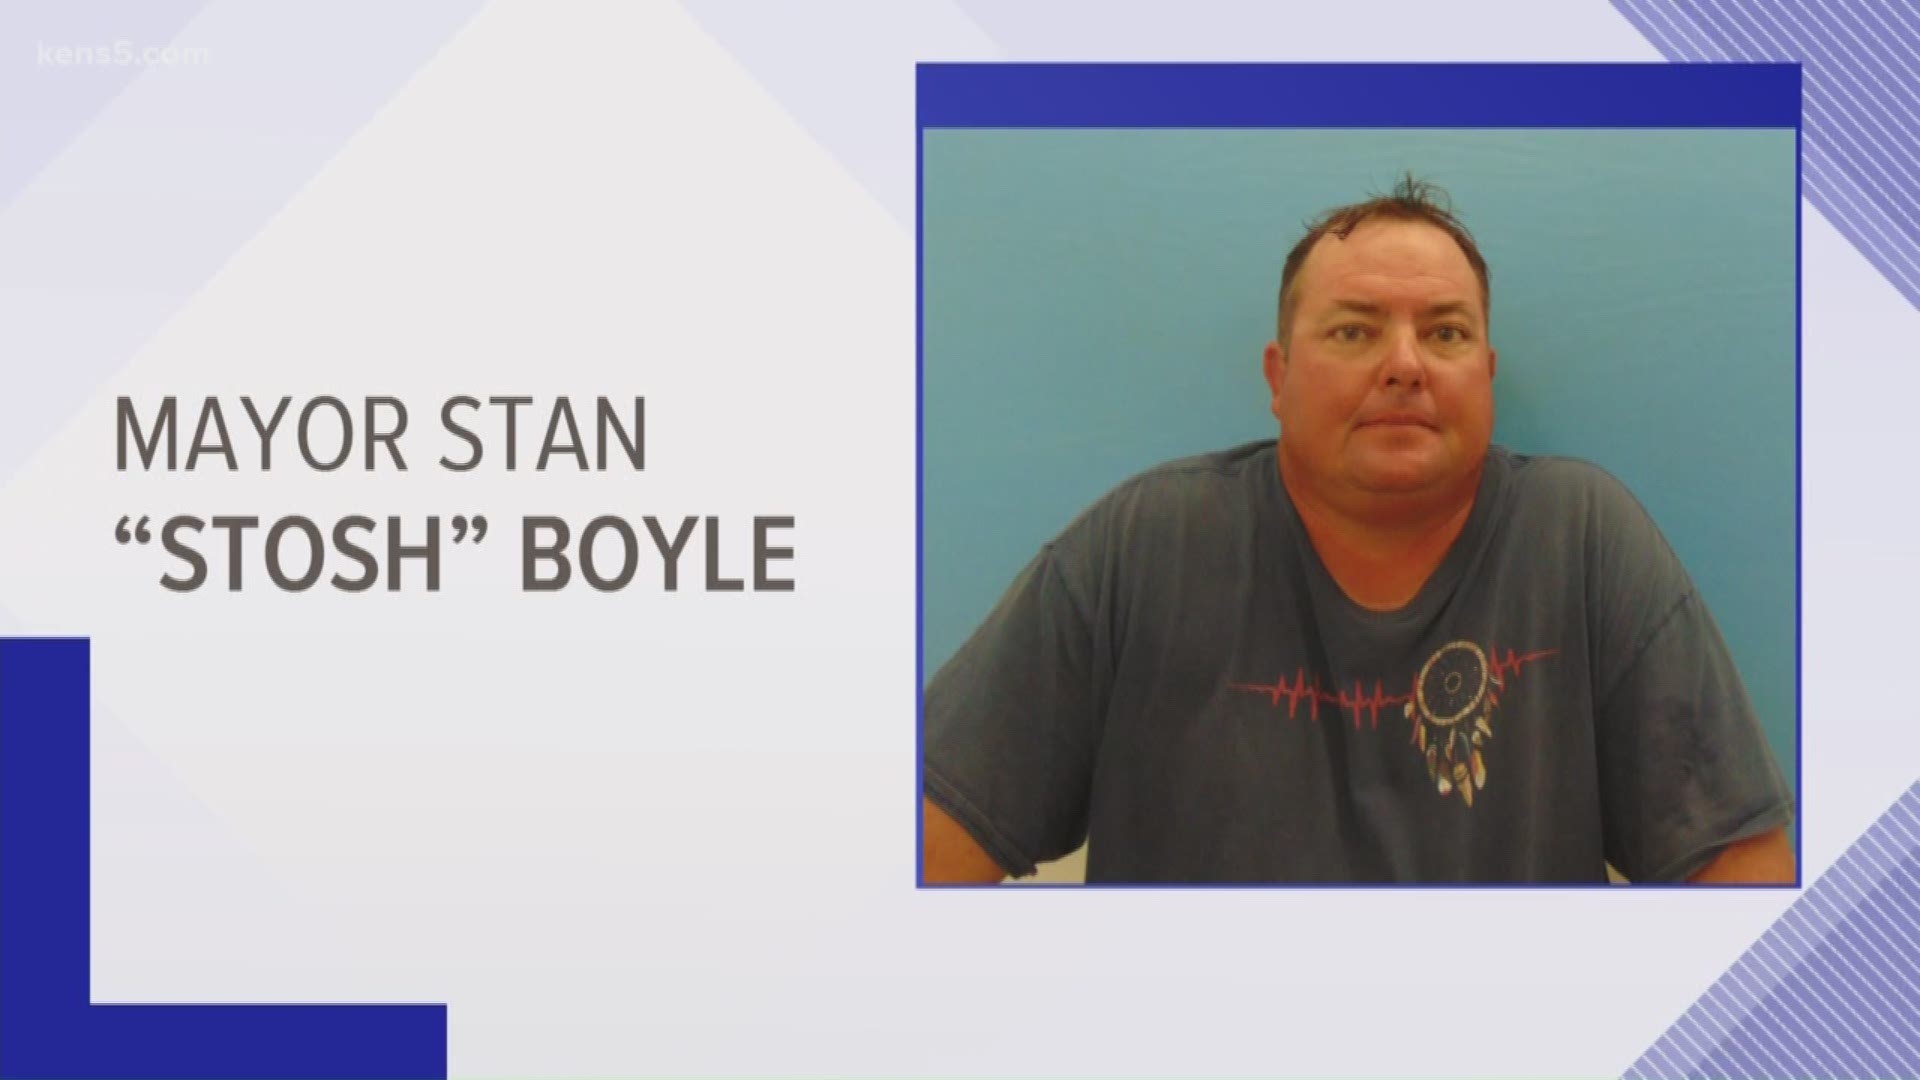 Cibolo mayor Stan “Stosh” Boyle was arrested last week and charged with tampering with a government record in 2017.